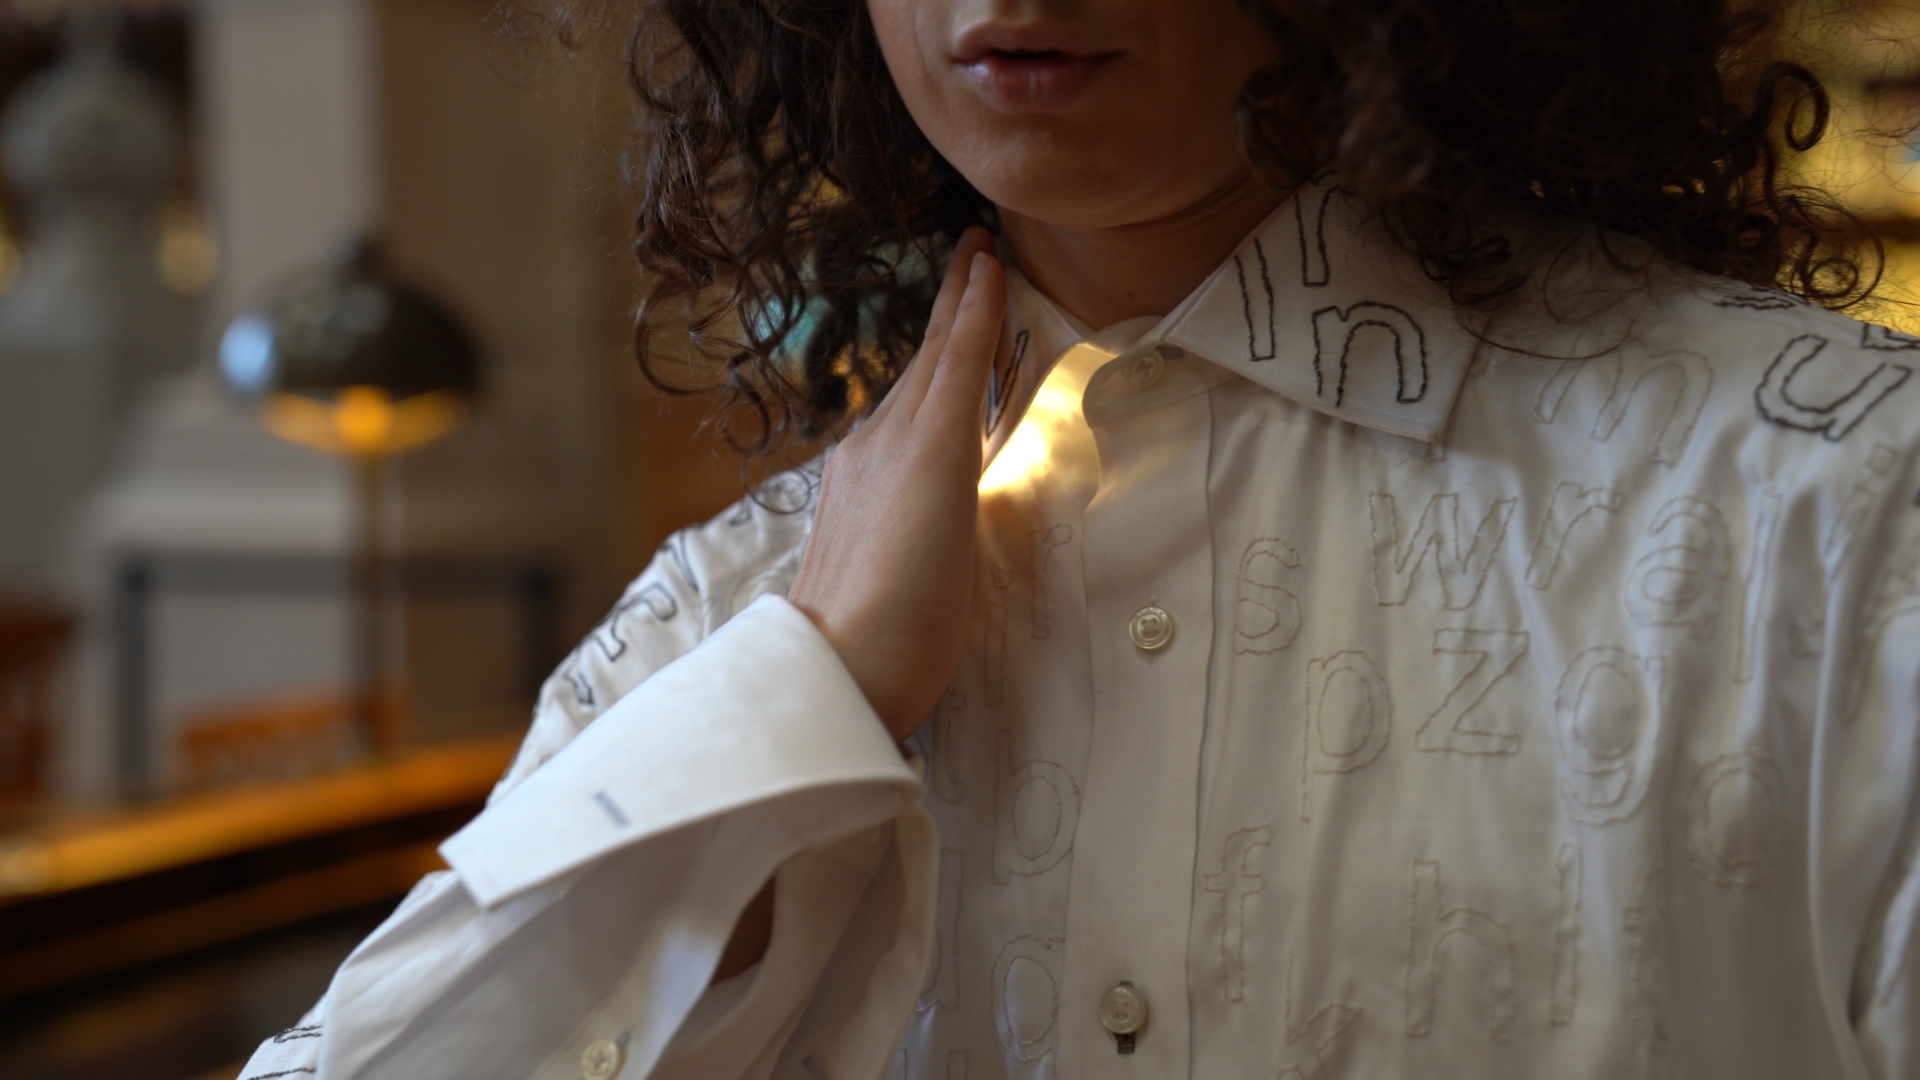 Body Memory, 2021, Performance shown at l’Institut National de L’Histoire de l’Art, Embroidered shirt, arduino system, sound, conductive thread. 3 minute video